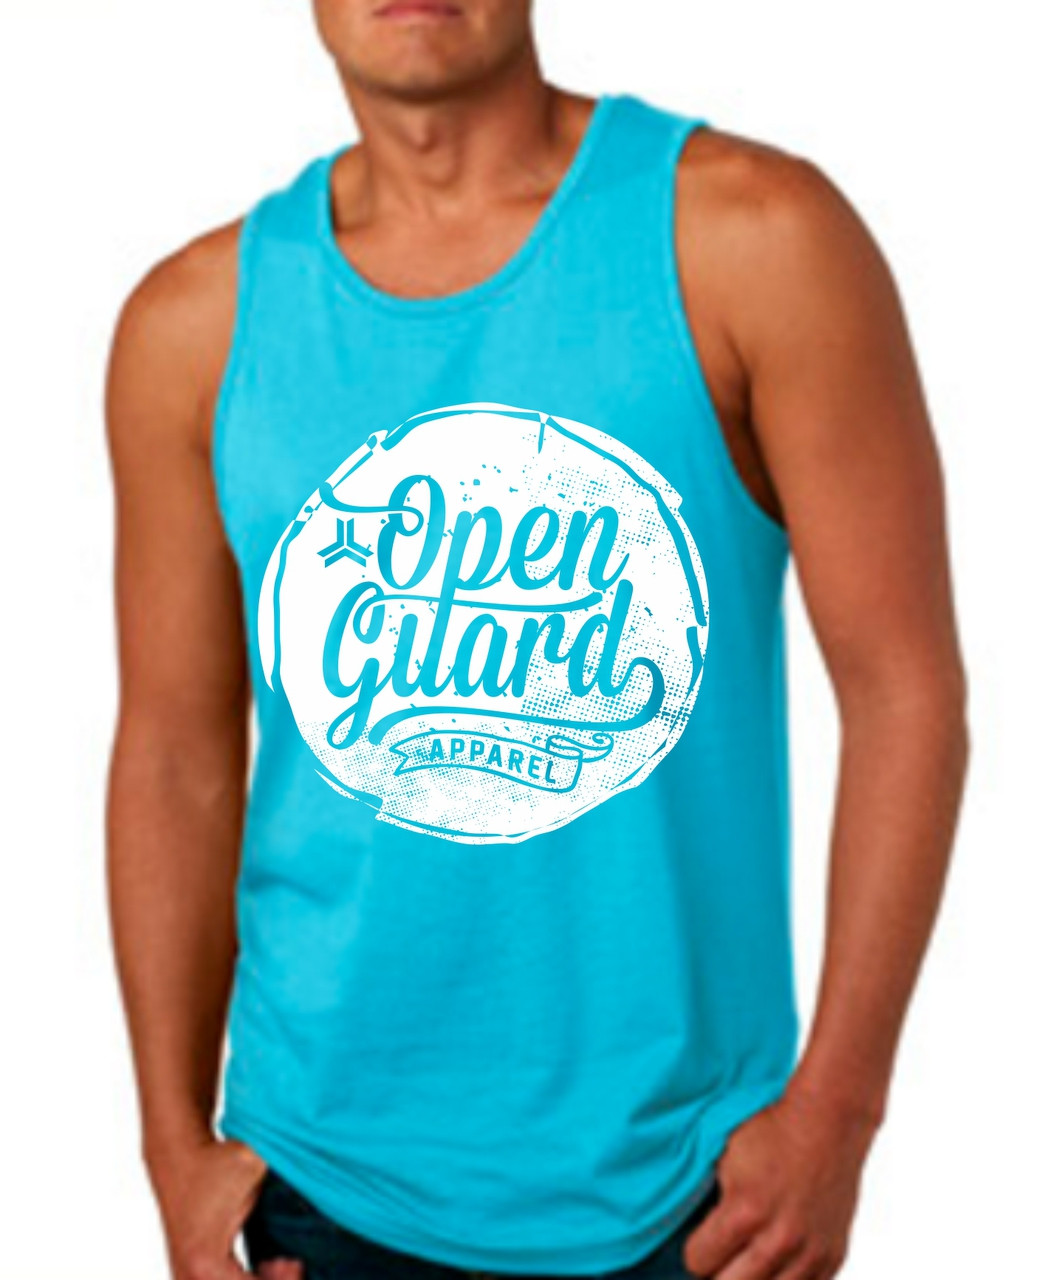 OGA Circle Flow Tank available in Tahiti blue and White at www.thejiujitsushop.com or www.openguardapparel.com 